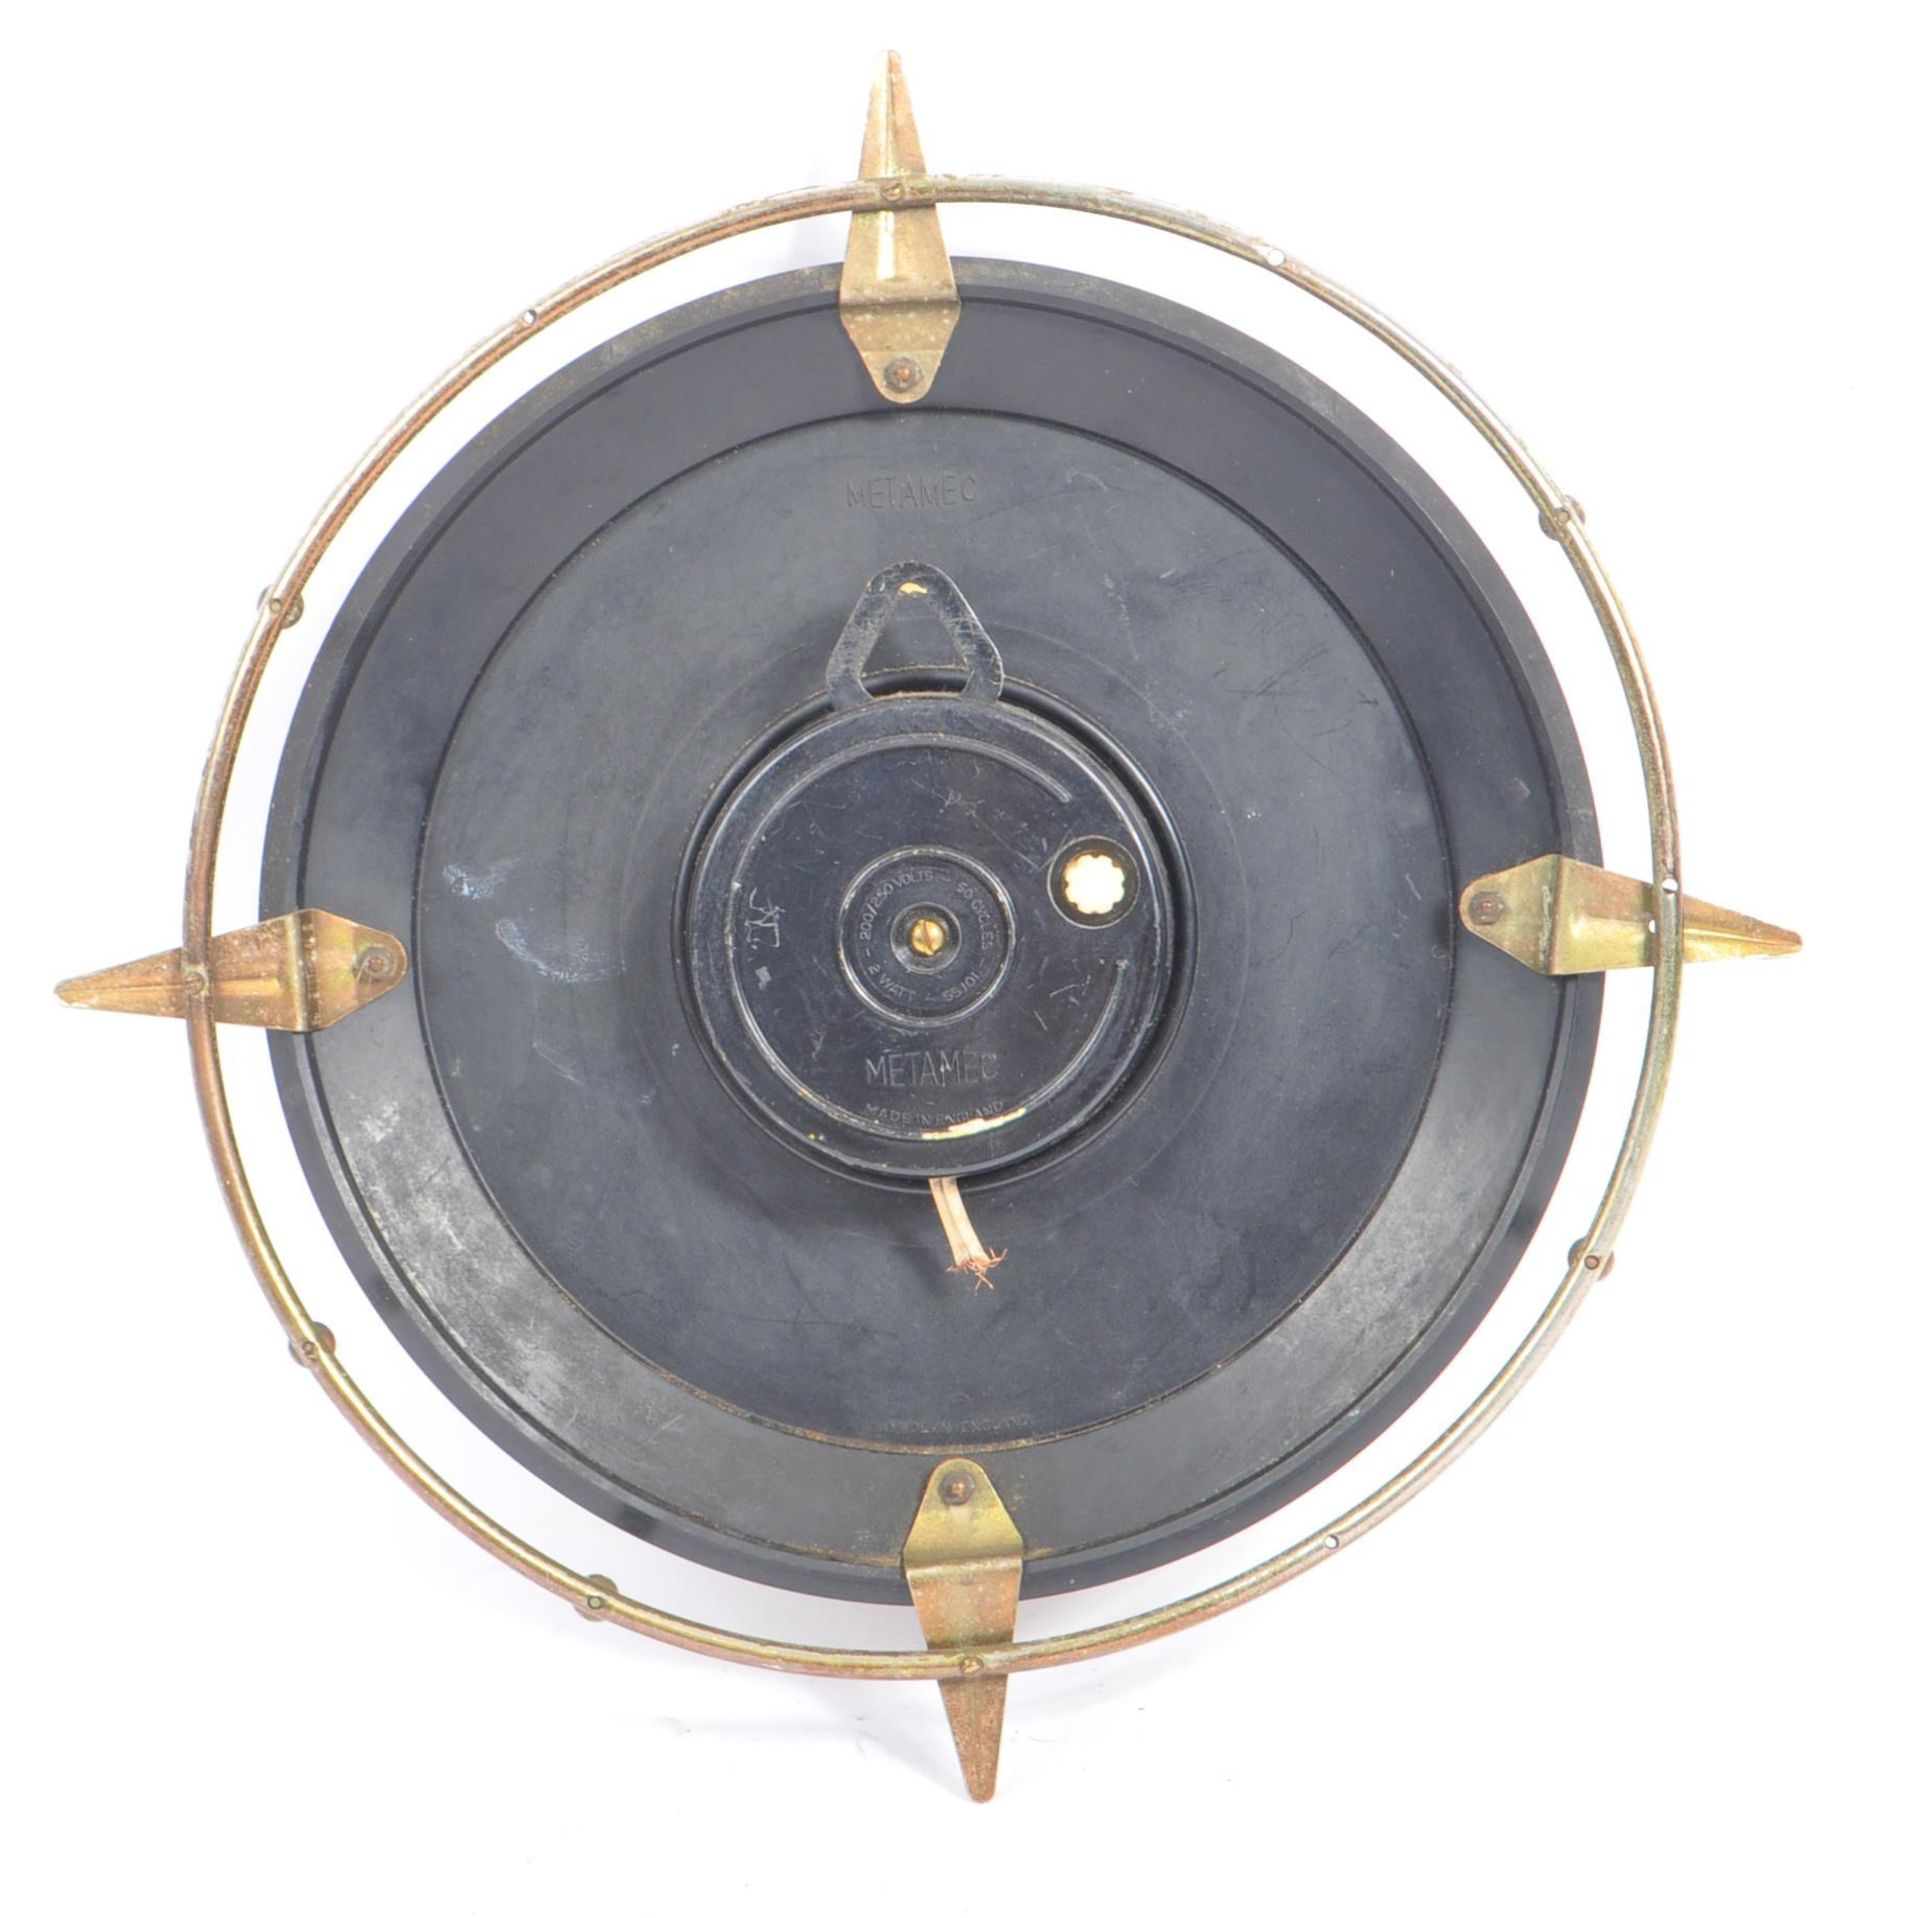 METAMEC - COLLECTION OF THREE VINTAGE WALL / MANTLE CLOCKS - Image 3 of 5